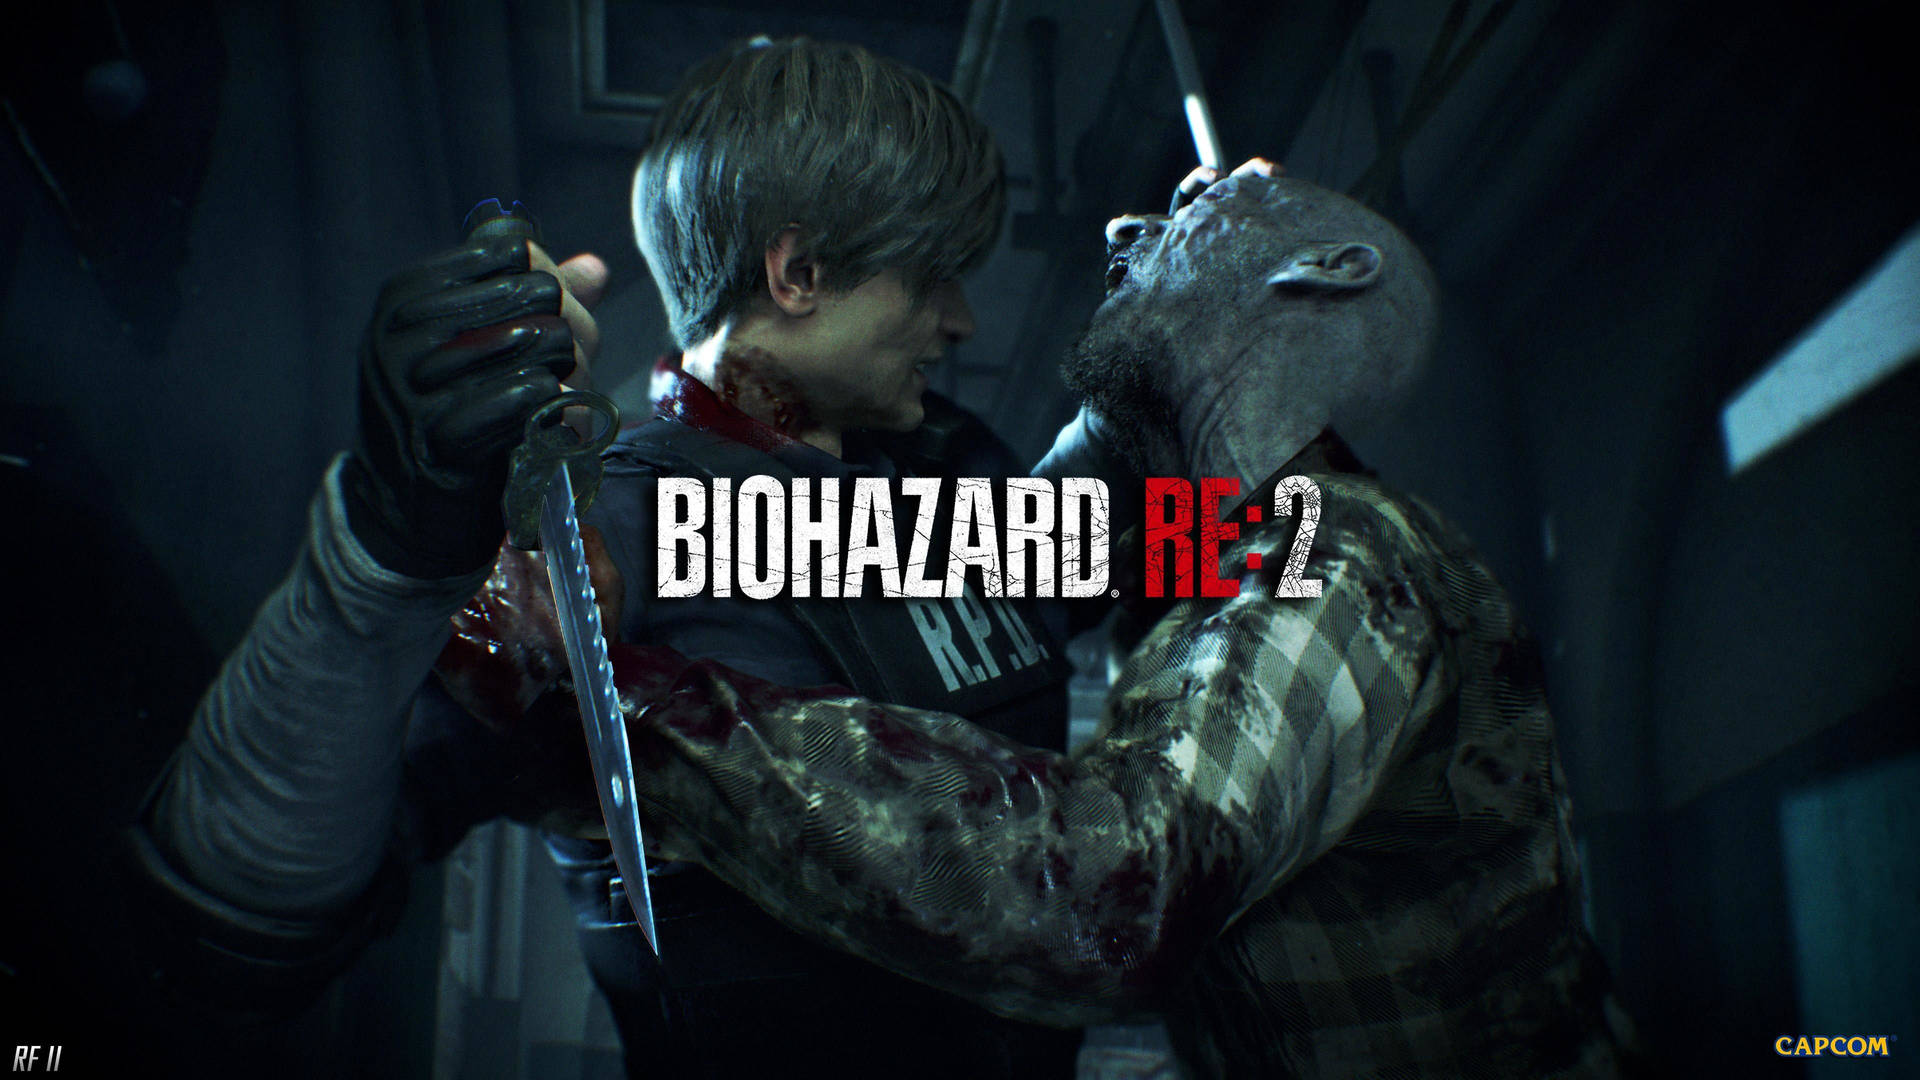 Leon Kennedy fights for survival in Raccoon City against a zombie horde in Capcom's classic, Resident Evil 2 Wallpaper